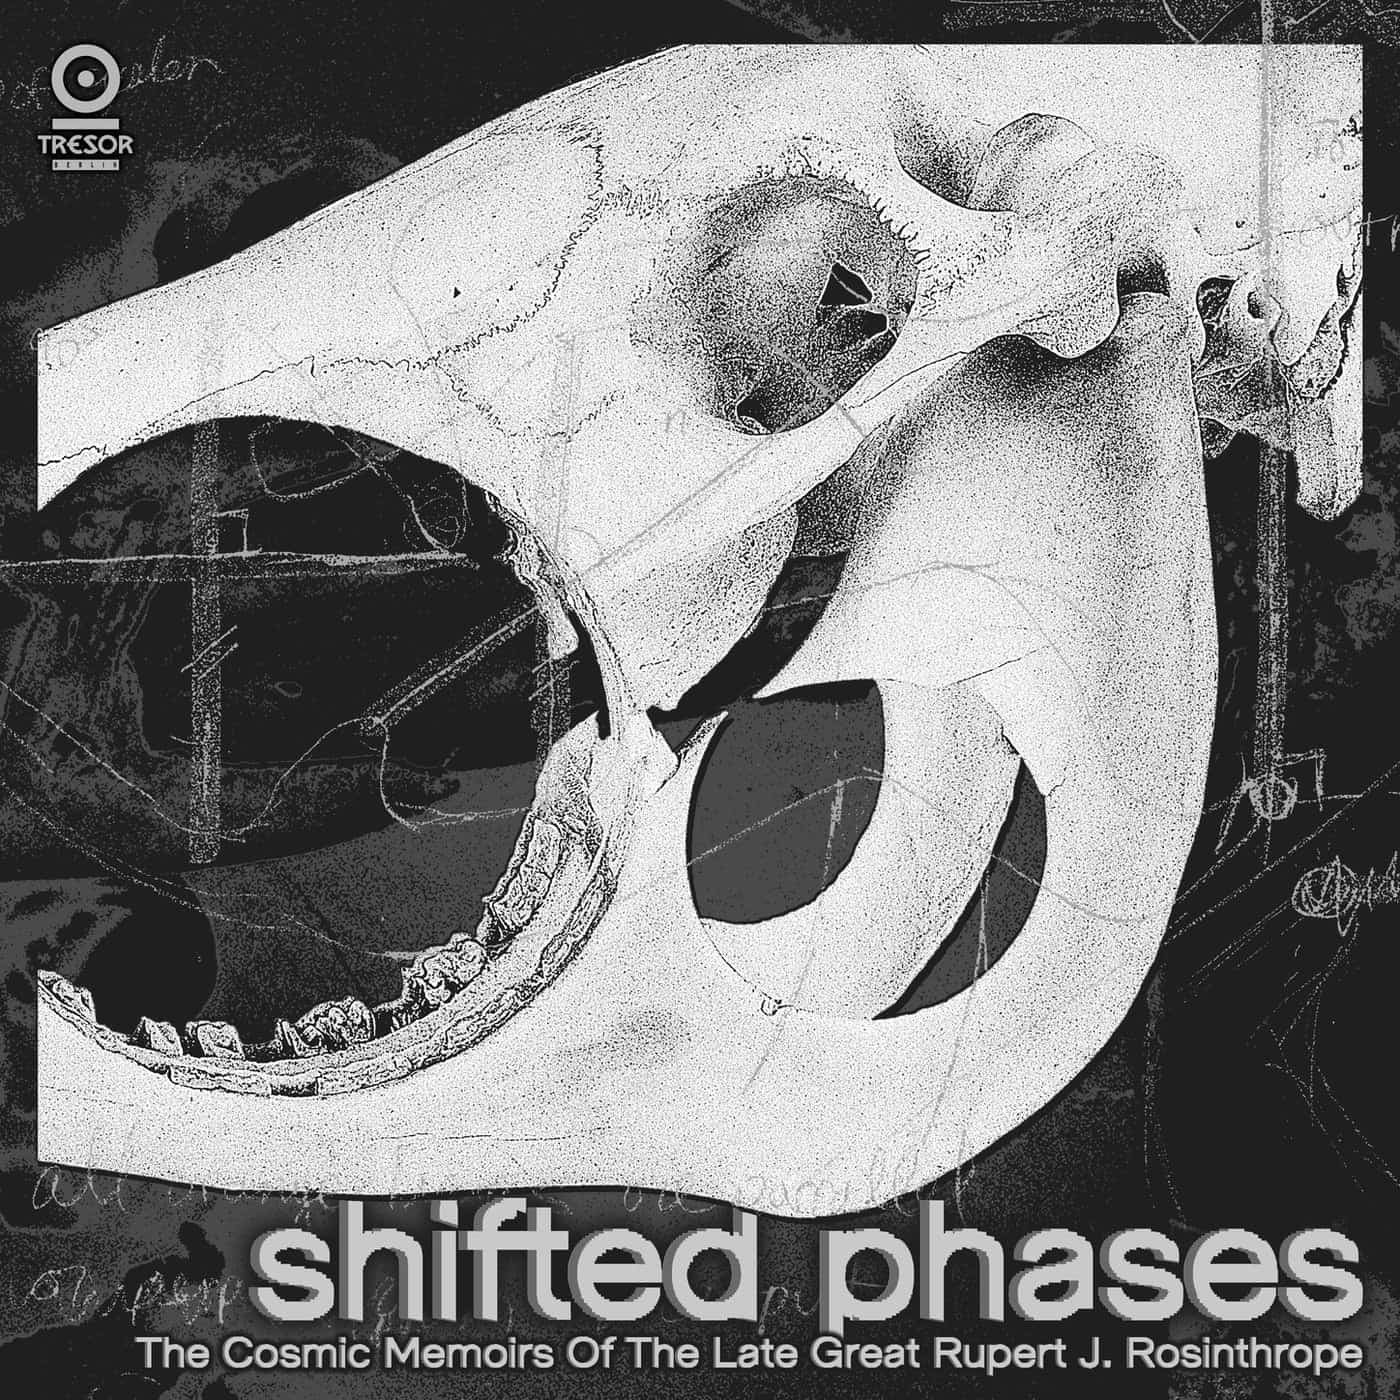 Download Shifted Phases - The Cosmic Memoirs Of The Late Great Rupert J. Rosinthrope on Electrobuzz